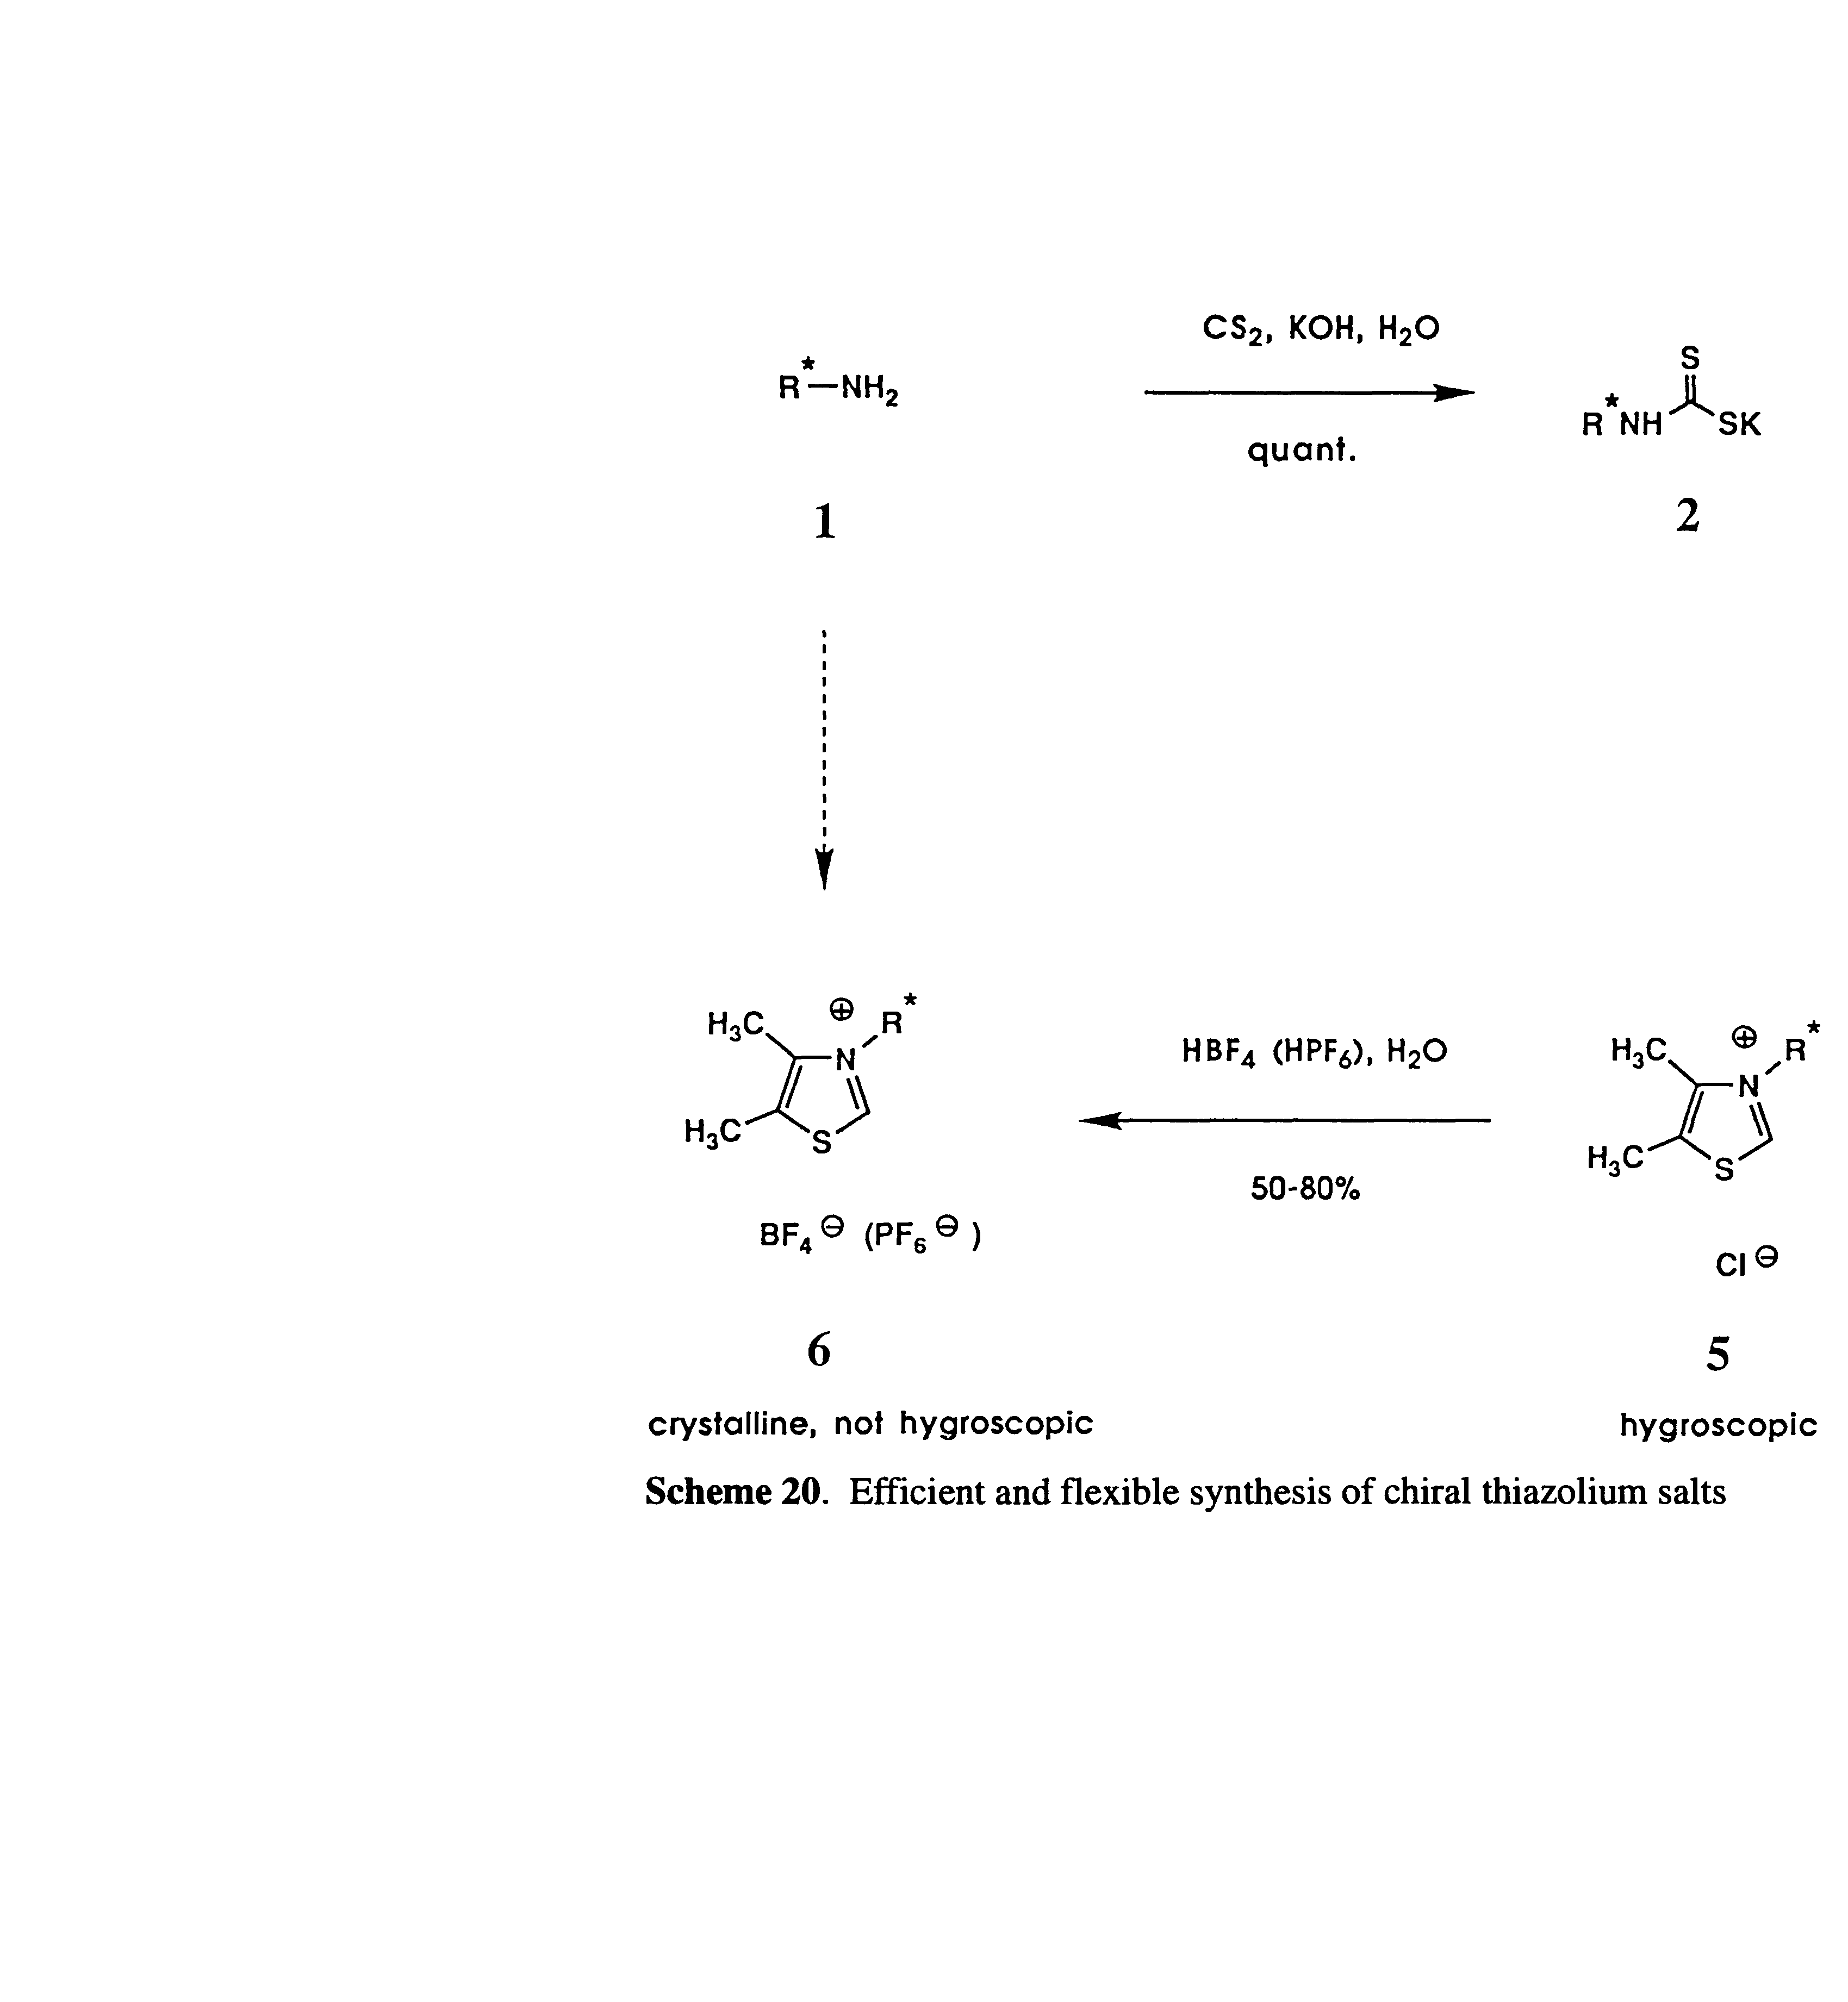 Scheme 20. Efficient and flexible synthesis of chiral thiazolium salts...